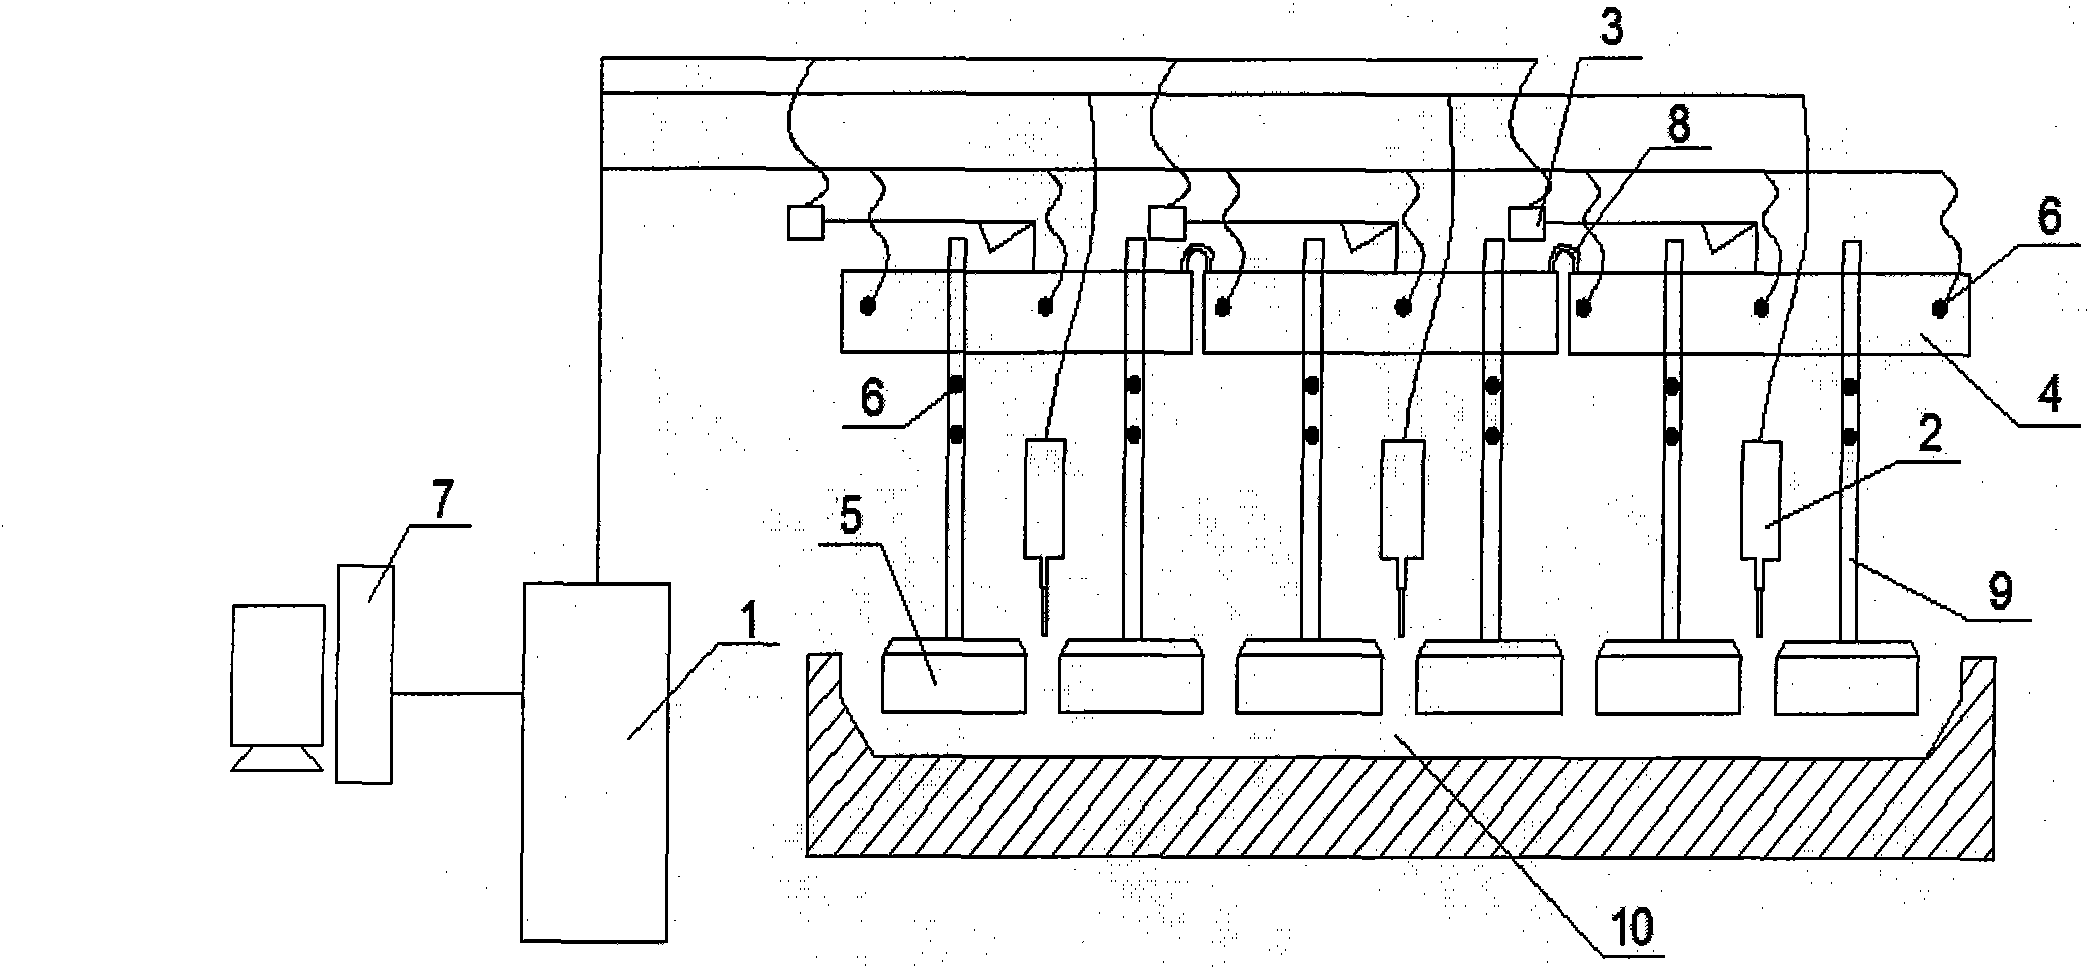 Aluminum electrolysis cell region control system and method